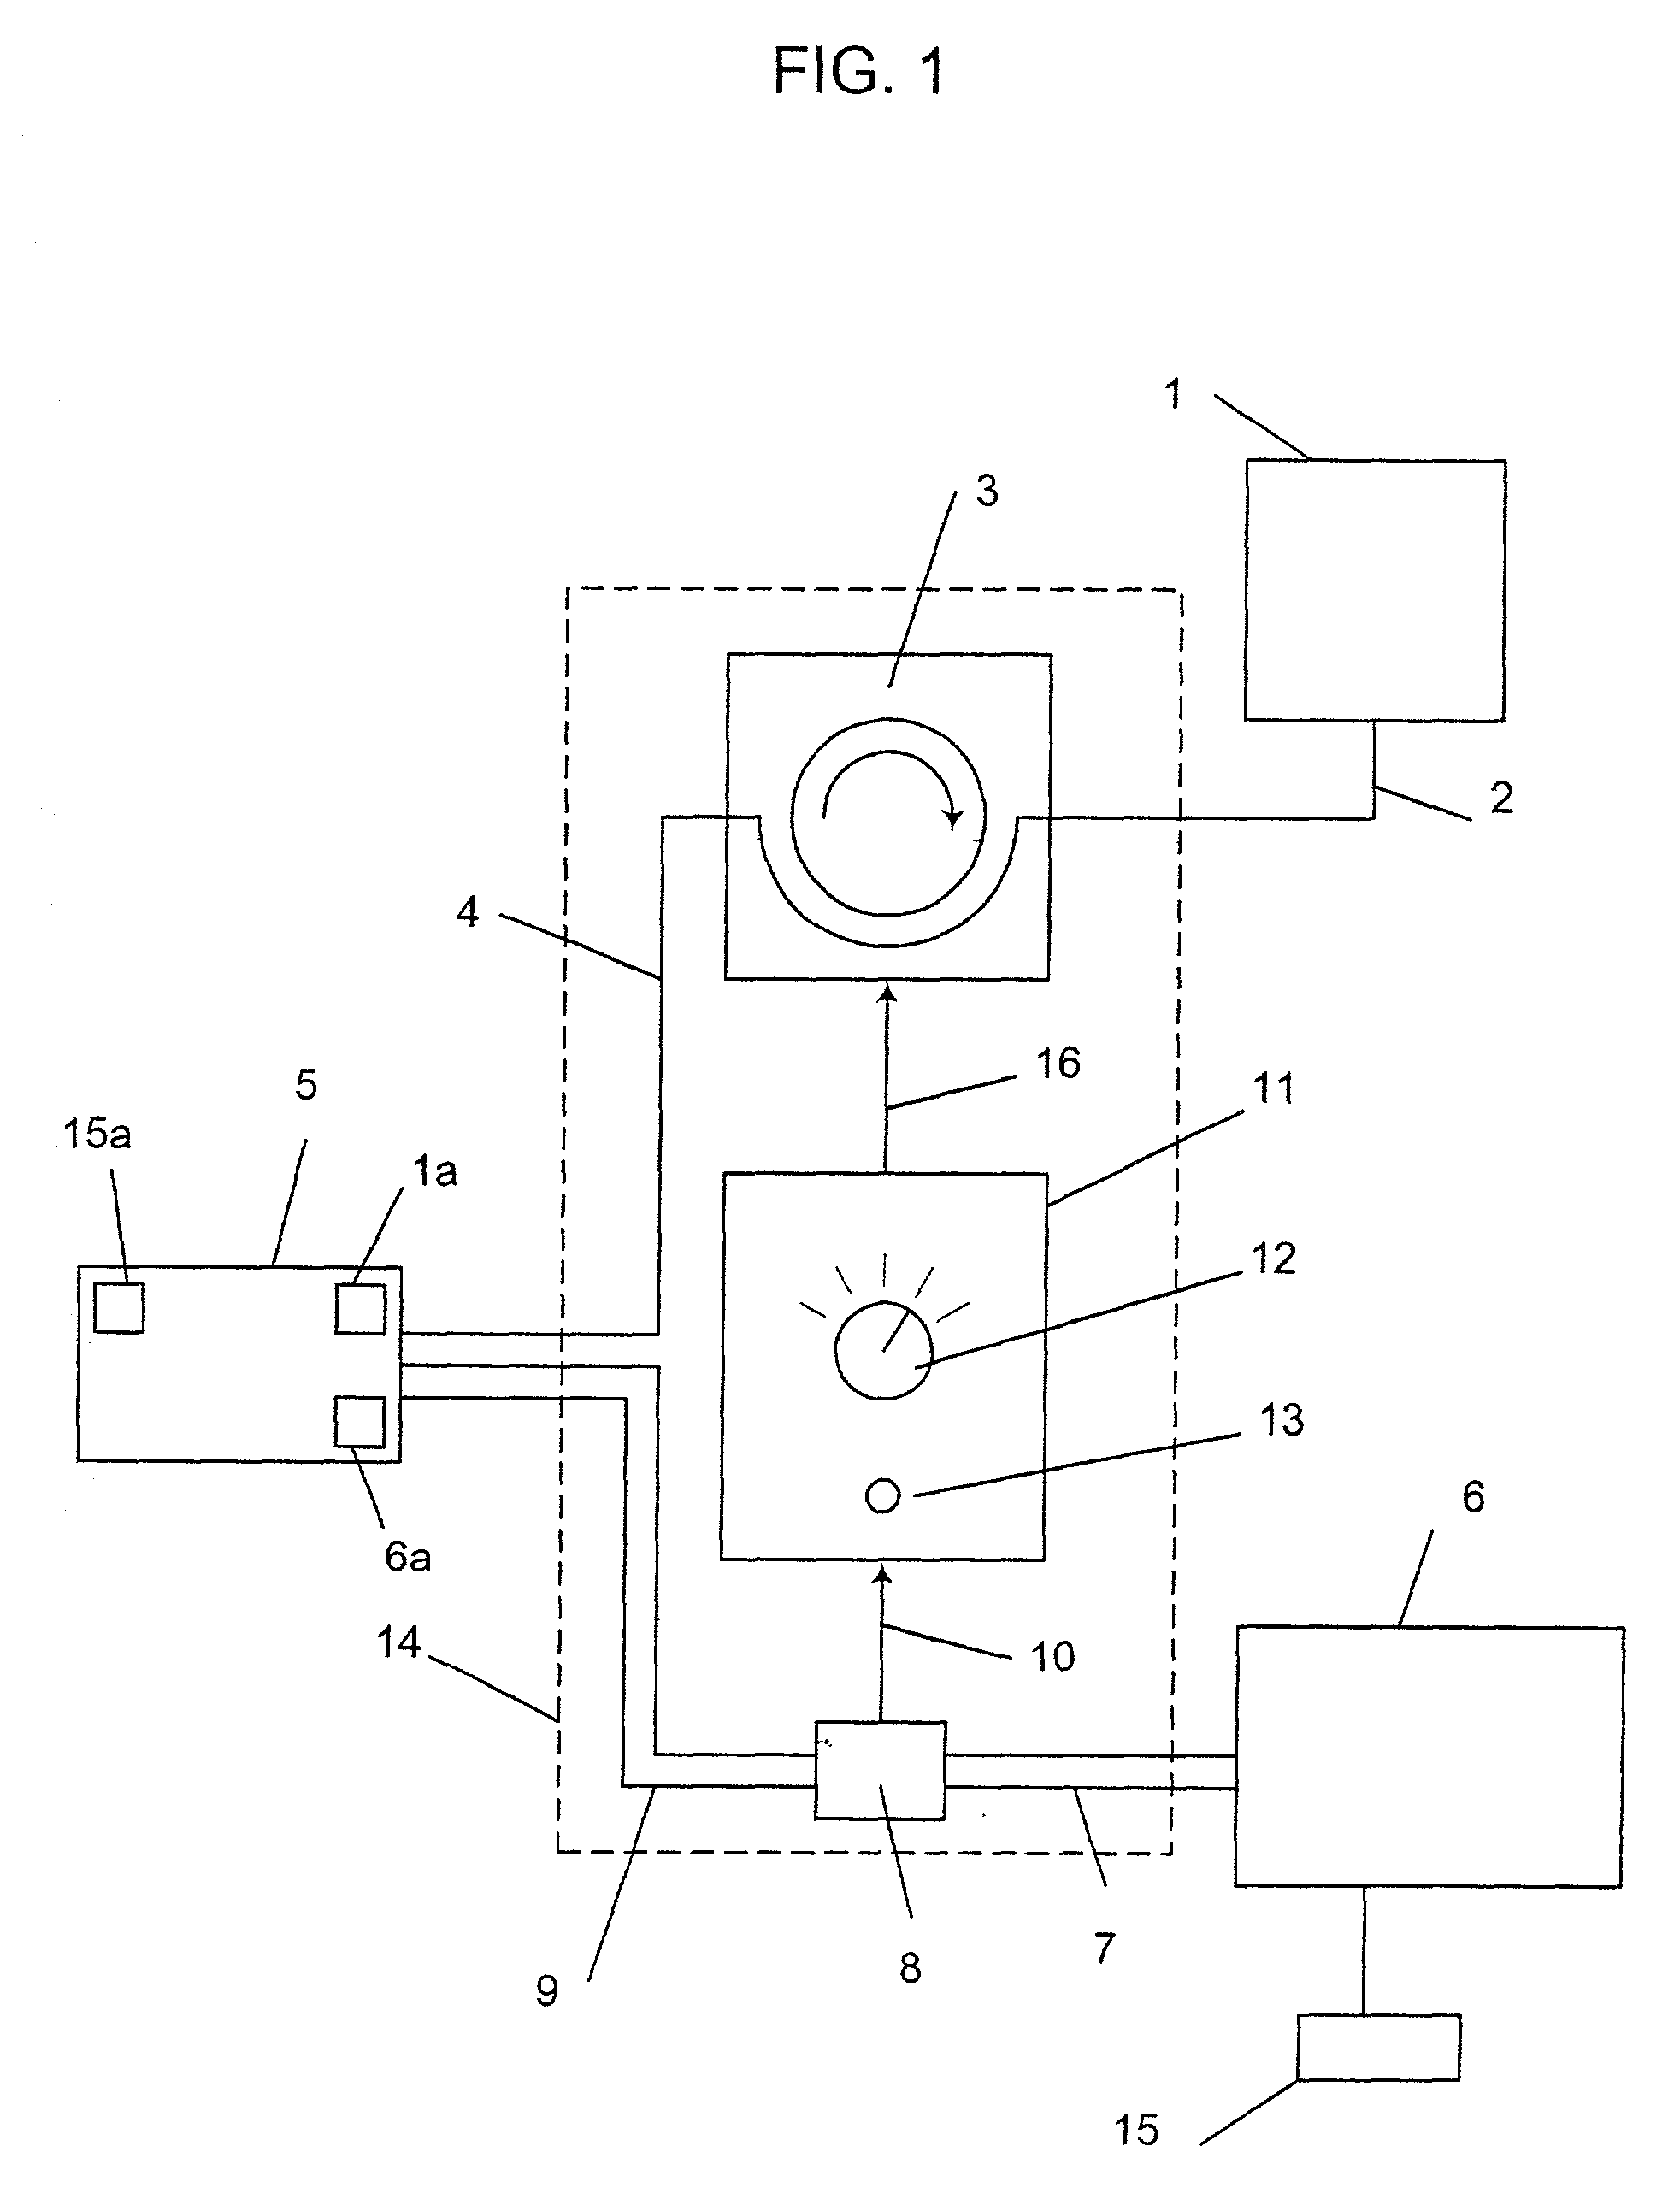 Fluid-assisted medical devices, fluid delivery systems and controllers for such devices, and methods